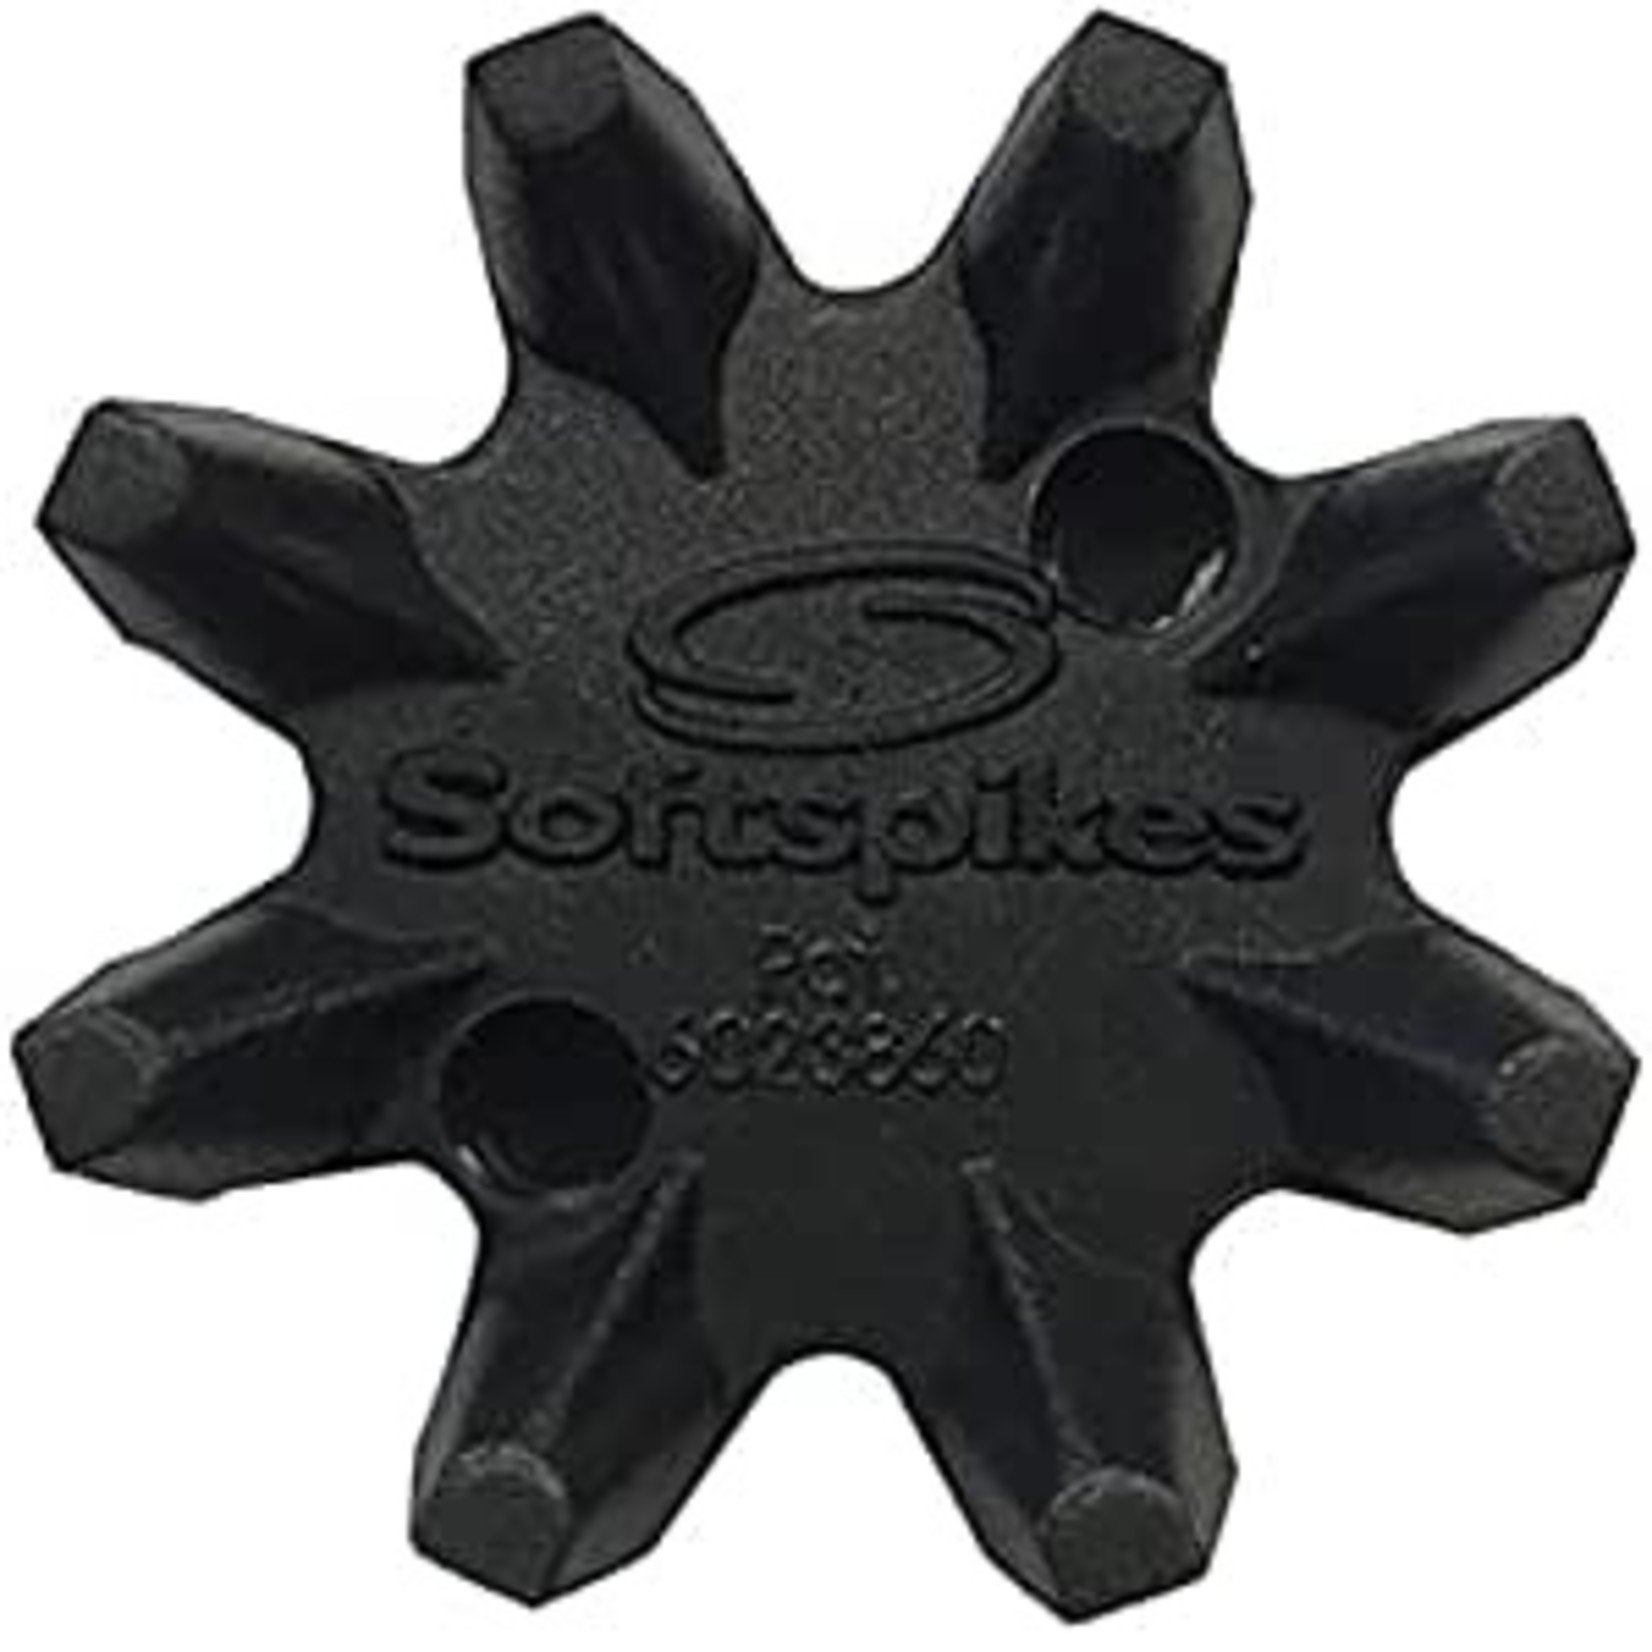 Softspikes Black Widow (Q-Fit) Clamshell